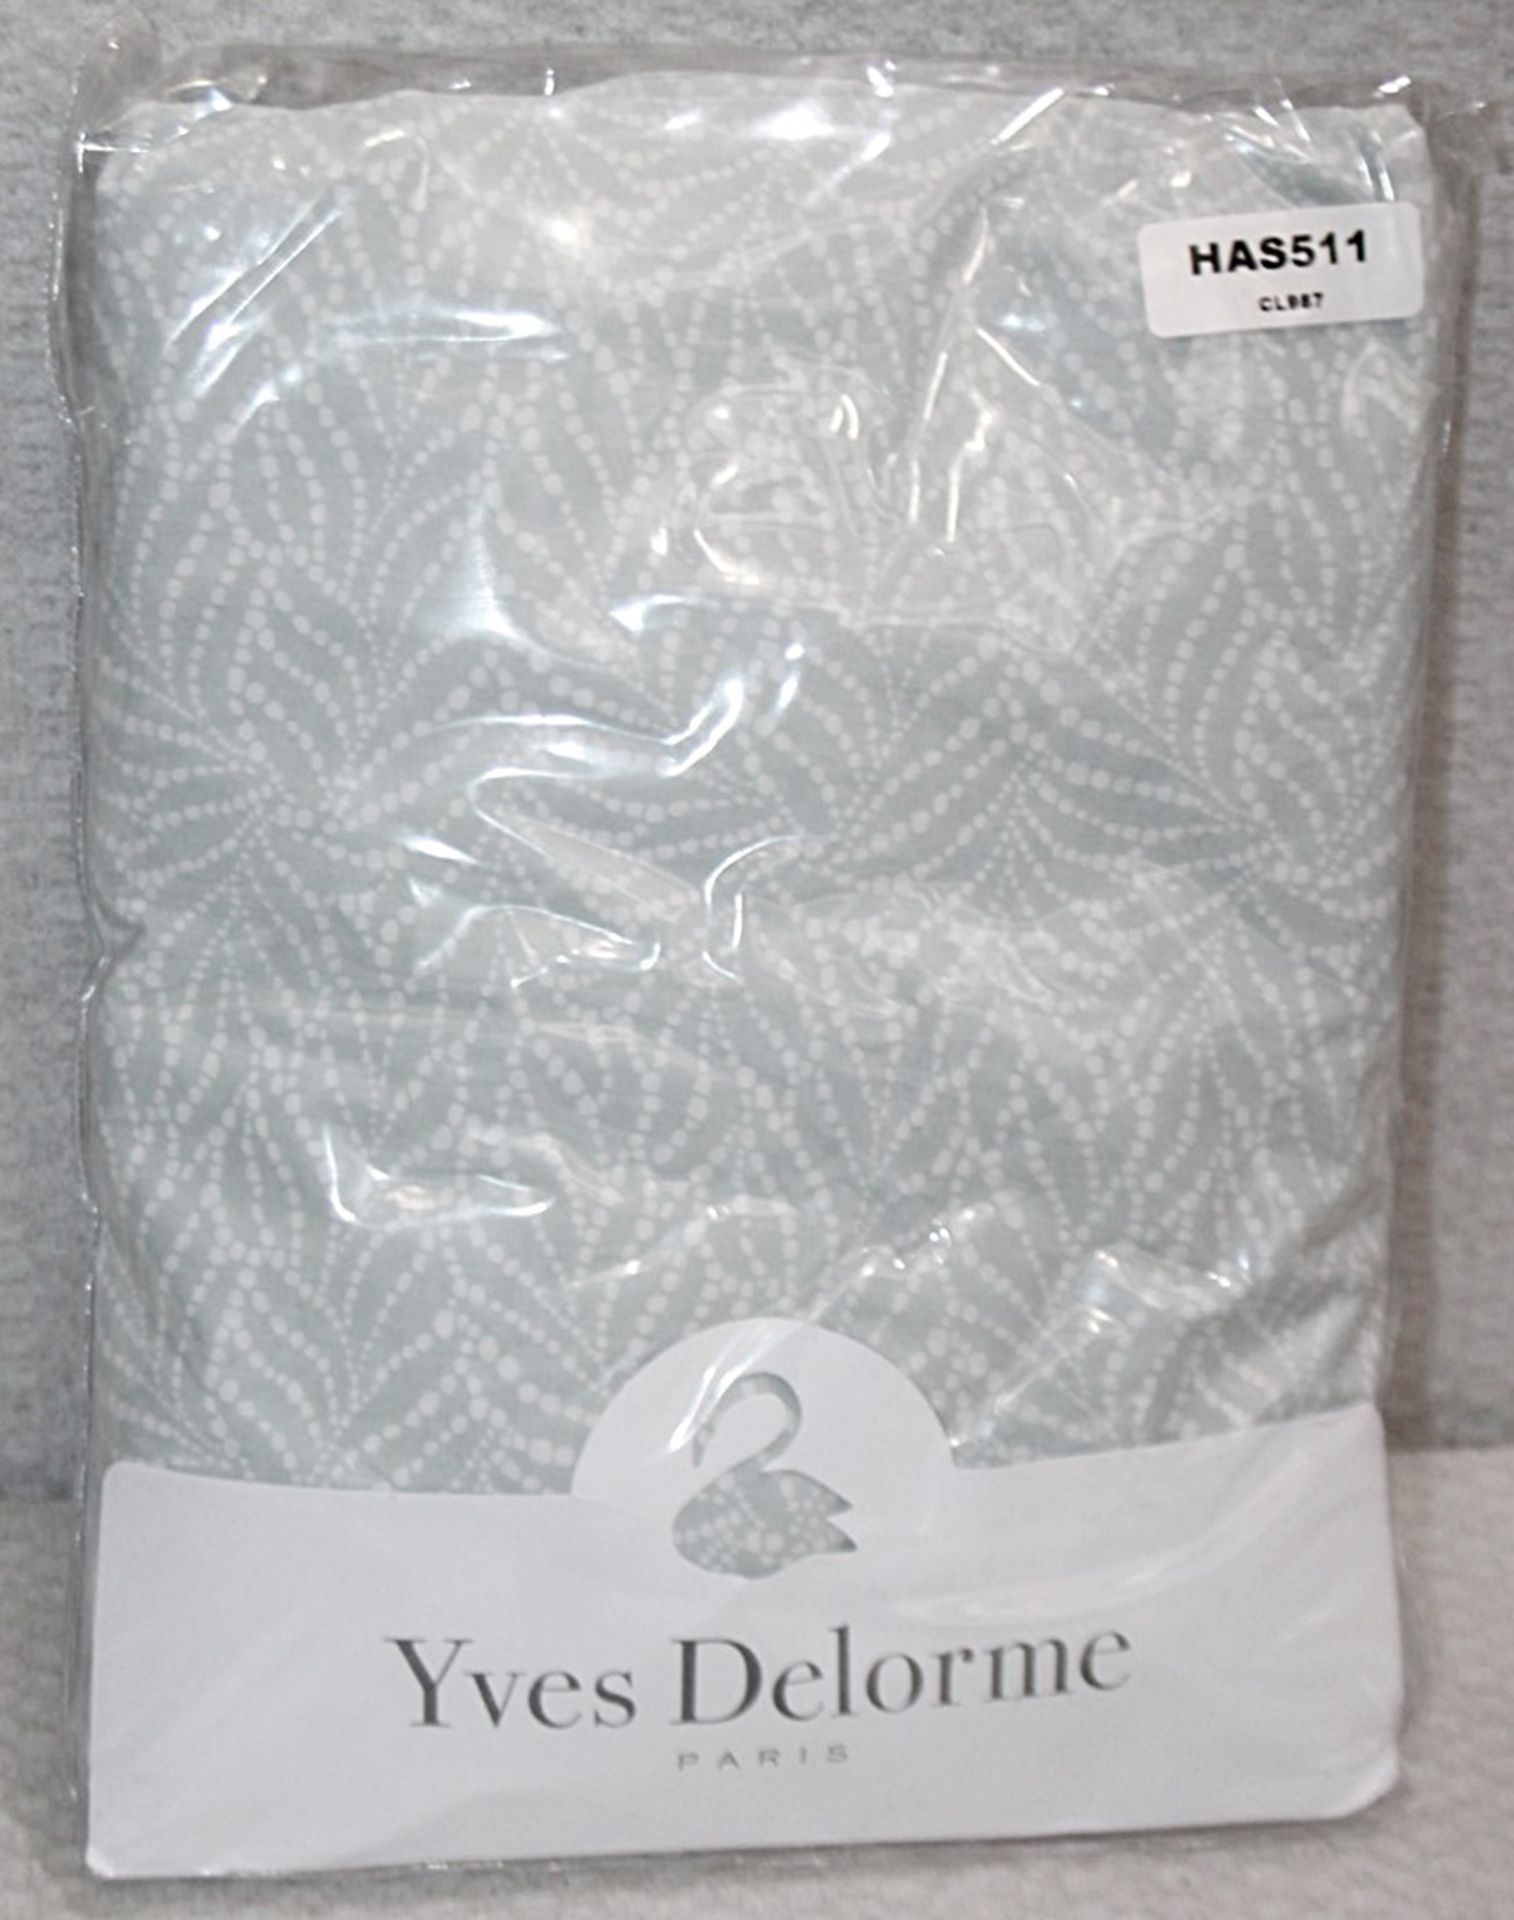 1 x YVES DELORME 'Caliopee' Single 100% Cotton Fitted Sheet (90cm x 190cm) - Unused Stock - Image 5 of 5